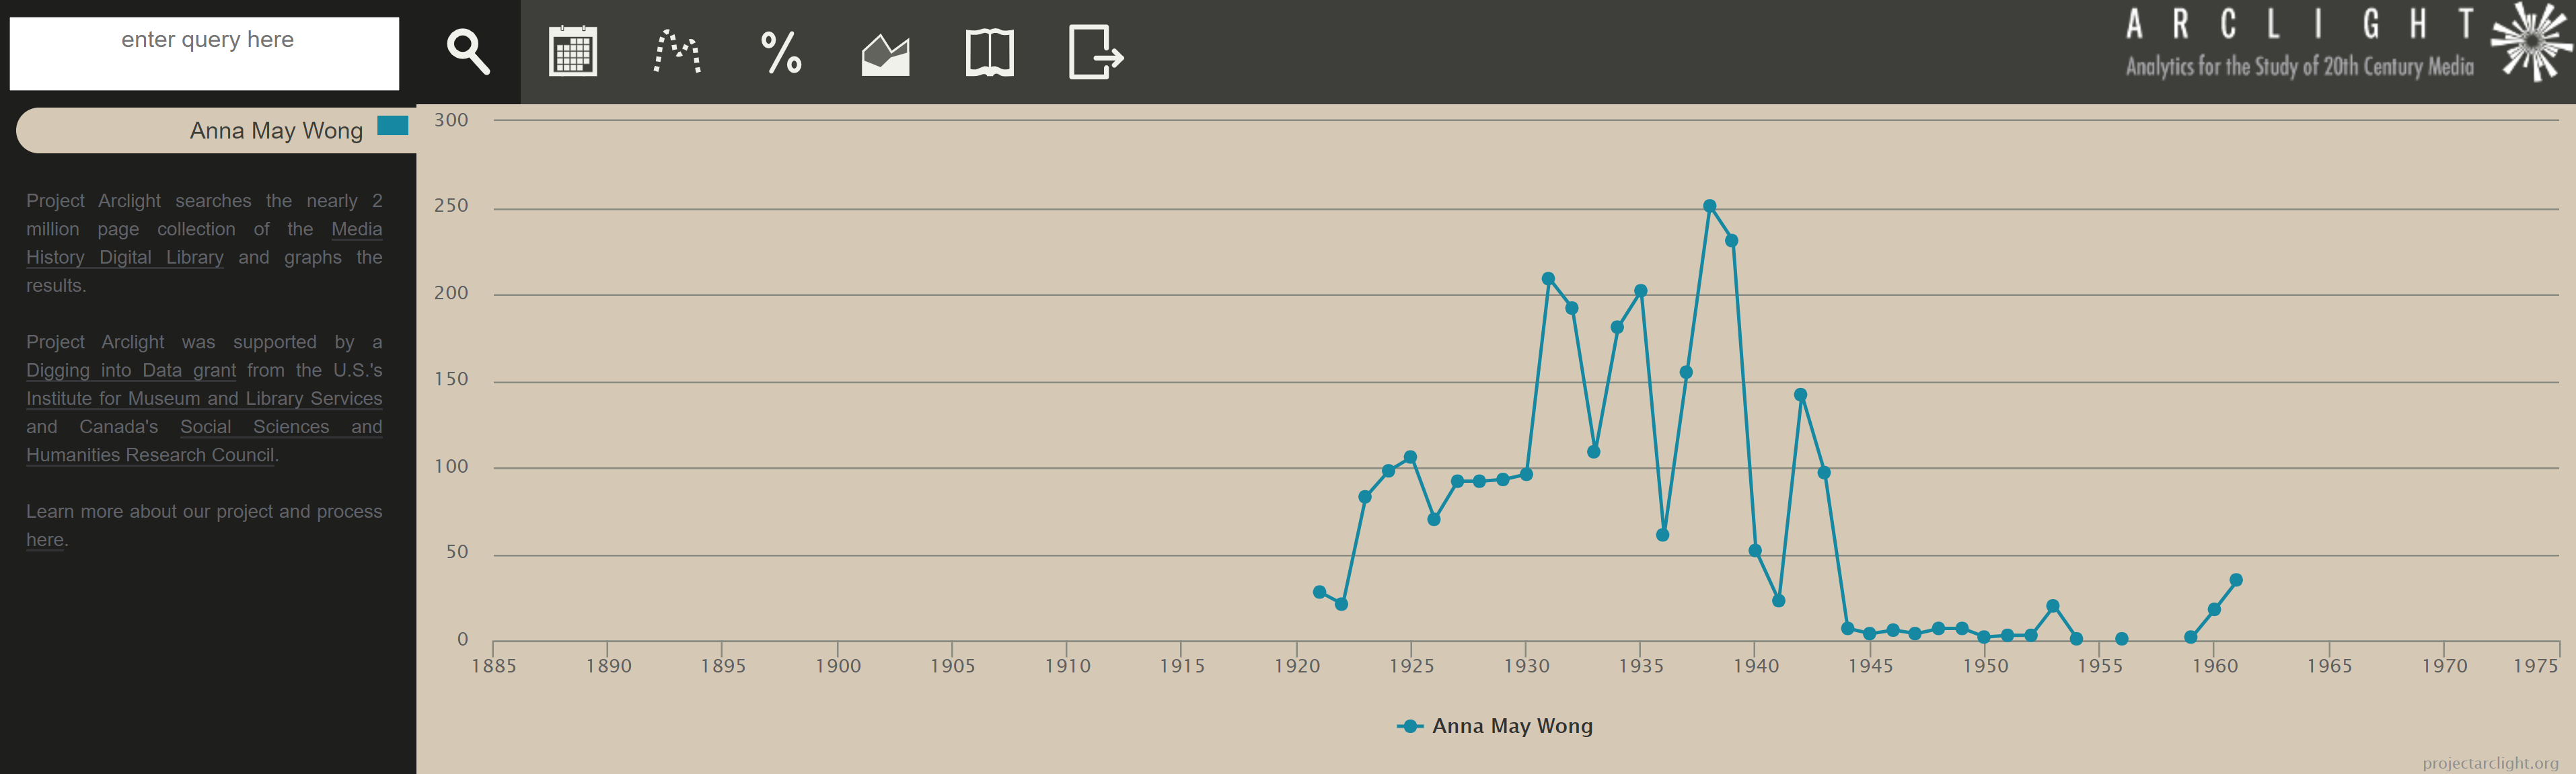 screenshot of Arclight results for Anna May Wong